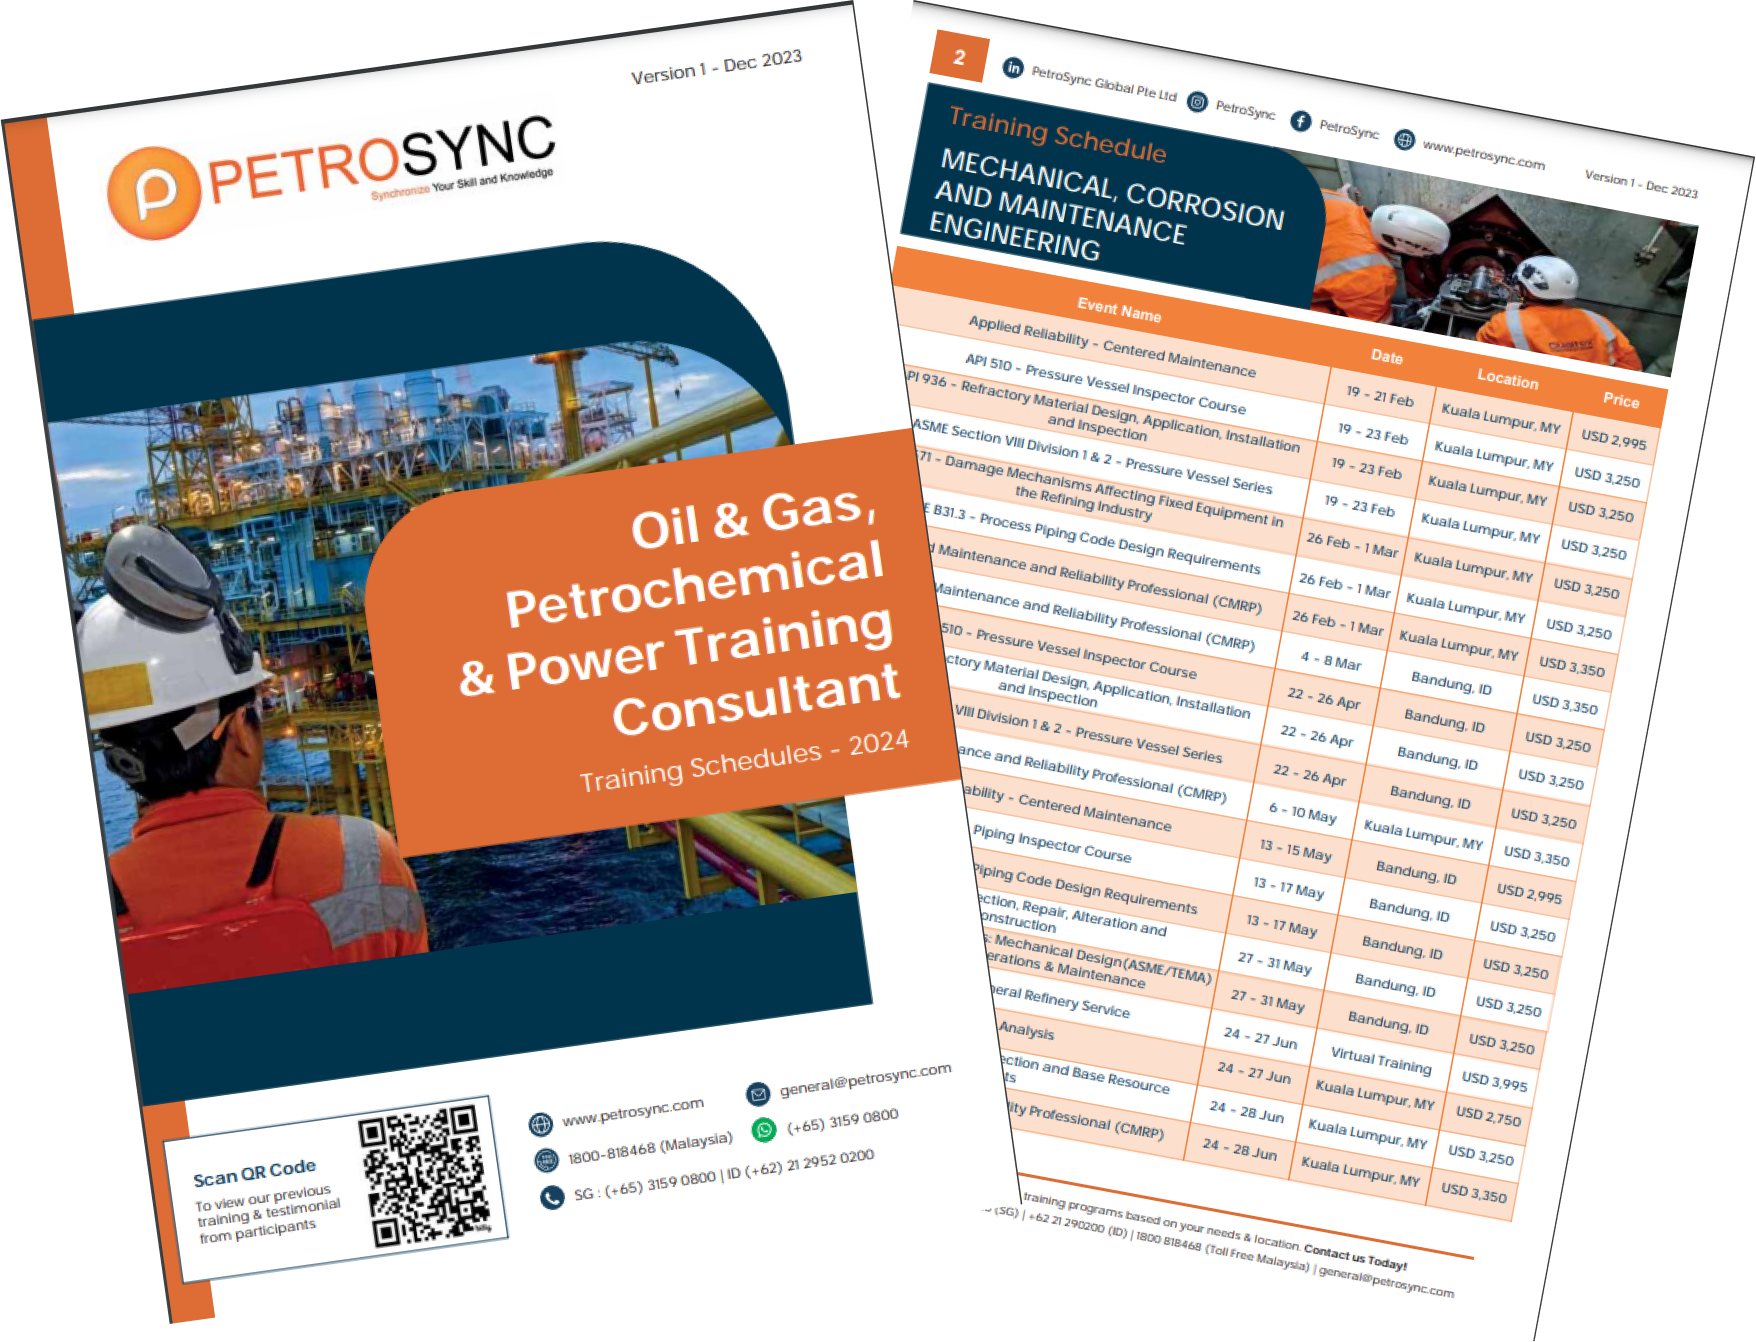 Oil and Gas, Petrochemical and Power training course schedule by PetroSync Global Pte Ltd